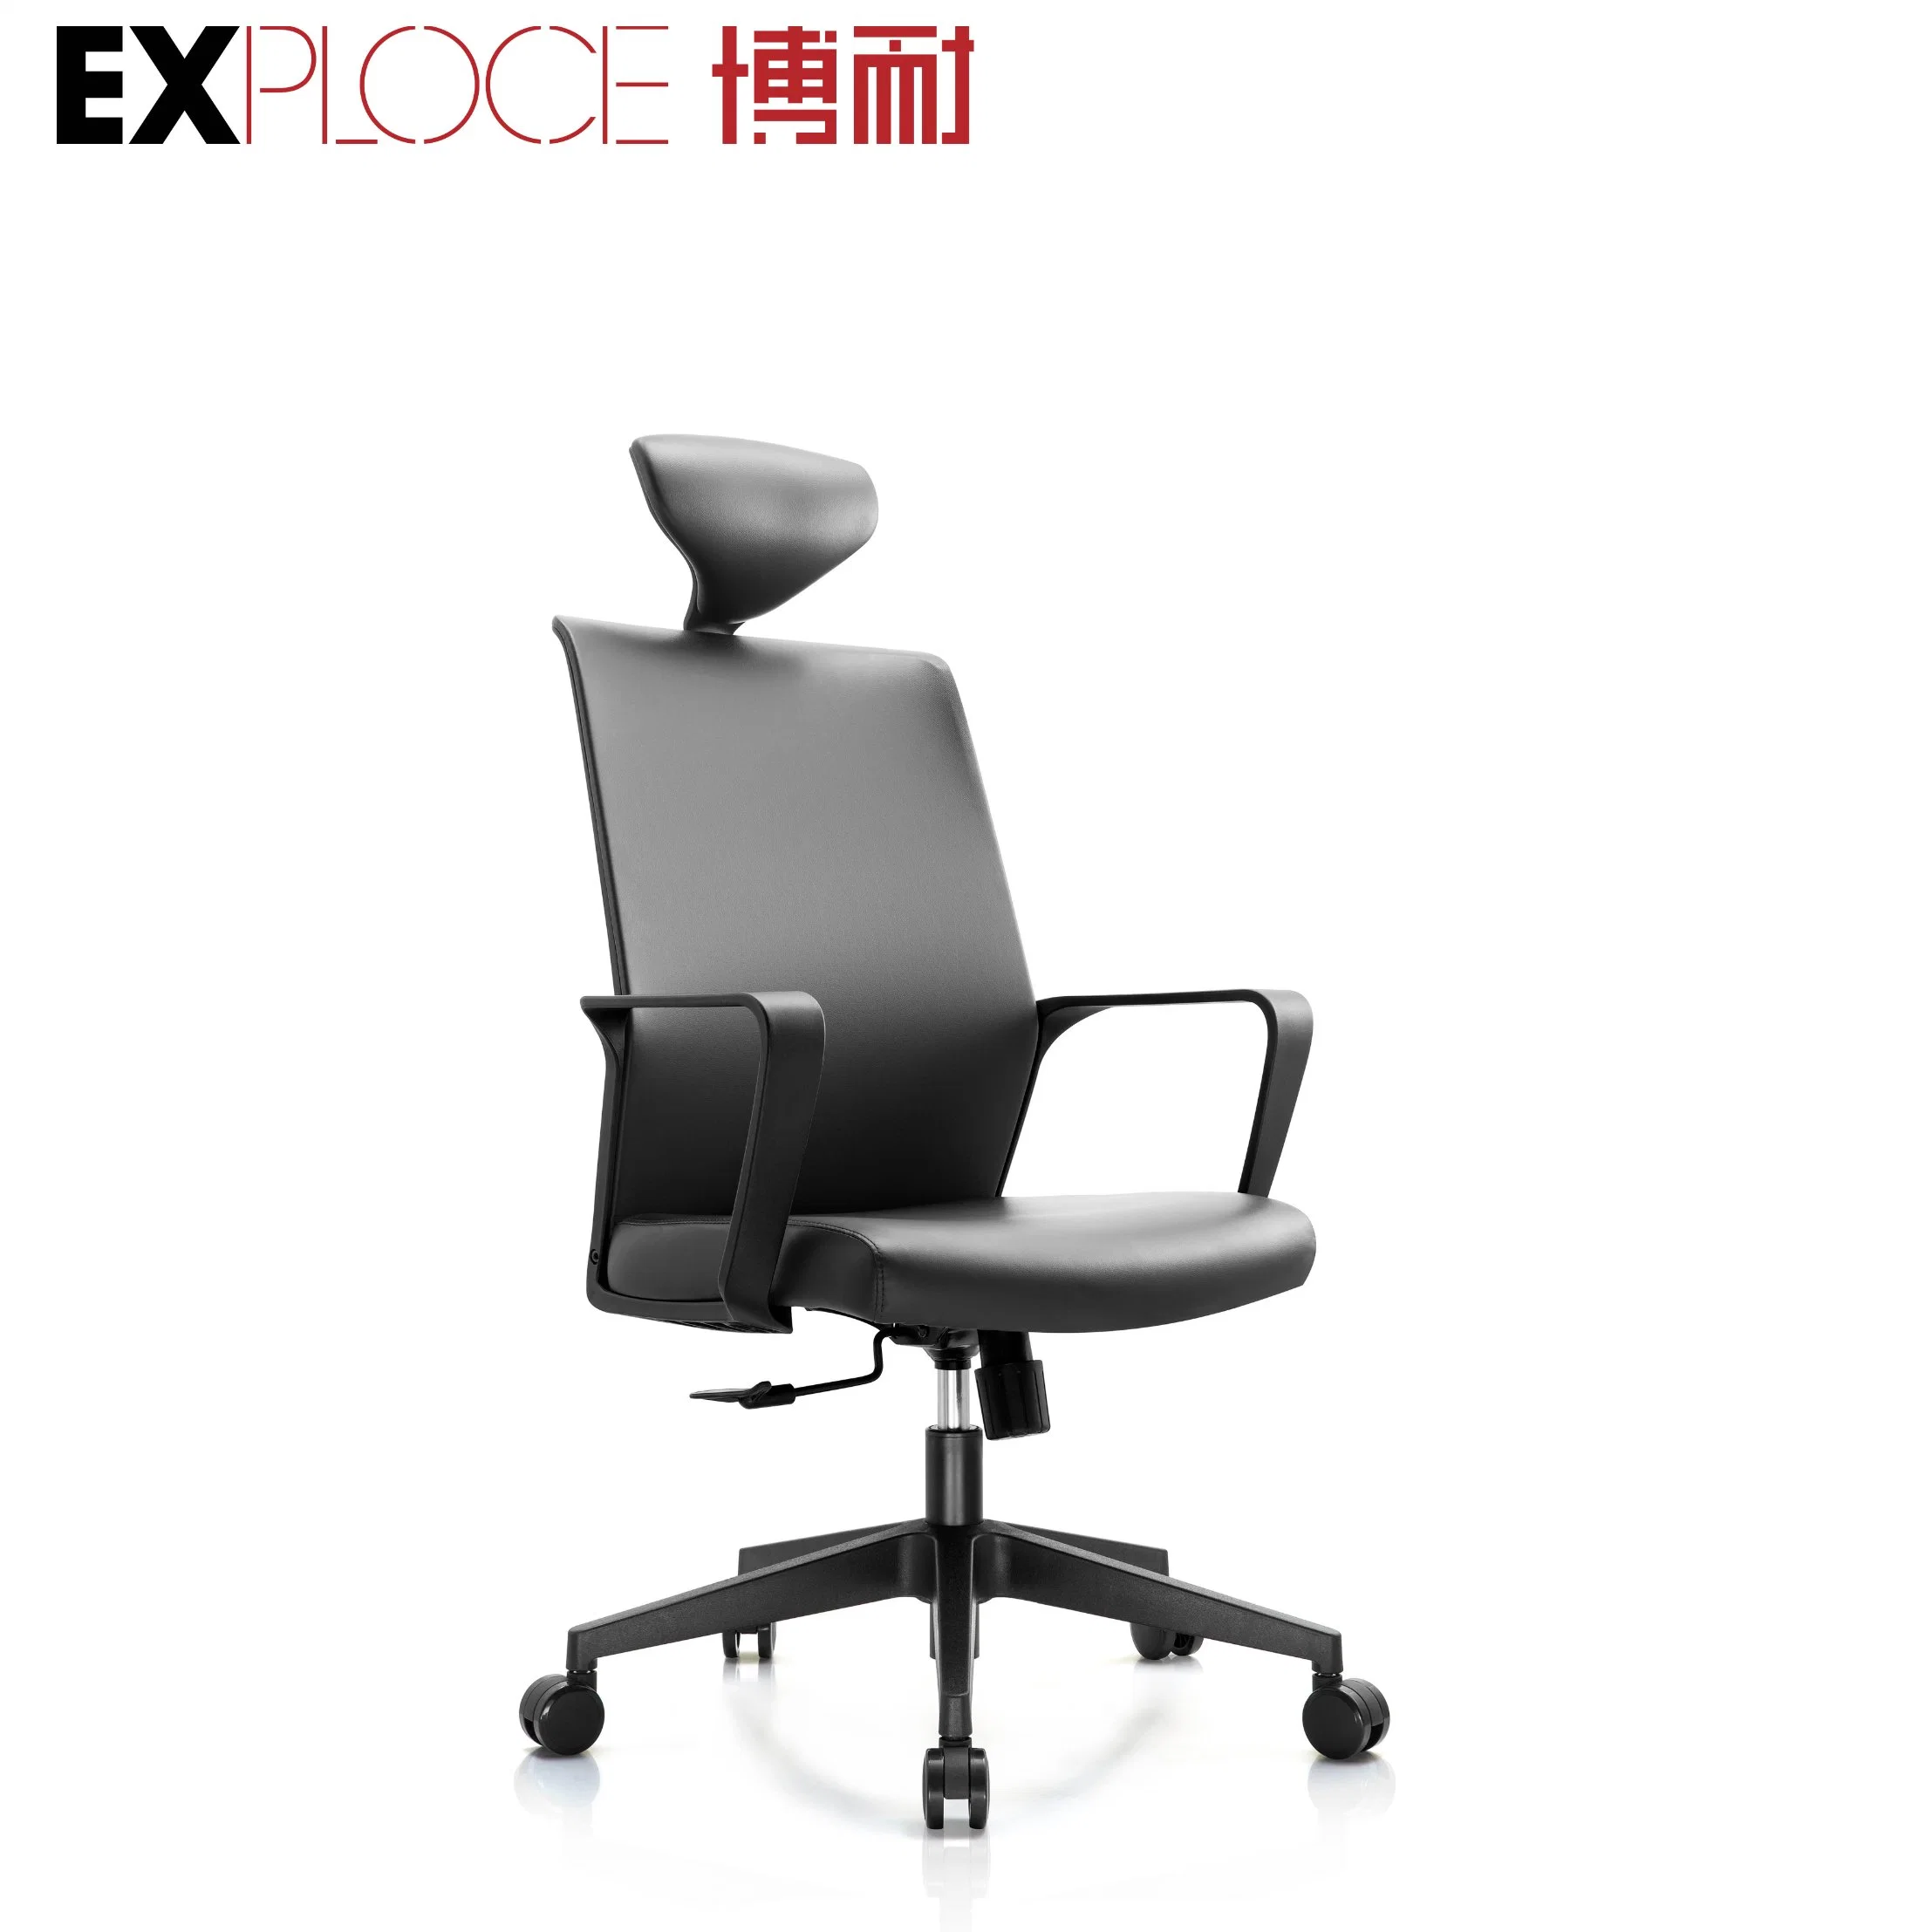 Modern Mesh Executive Ergonomic Plastic Leather Swivel Design Gaming Message Meeting Staff Task Training Visitor Workstation Chair for Office /Home Teacher